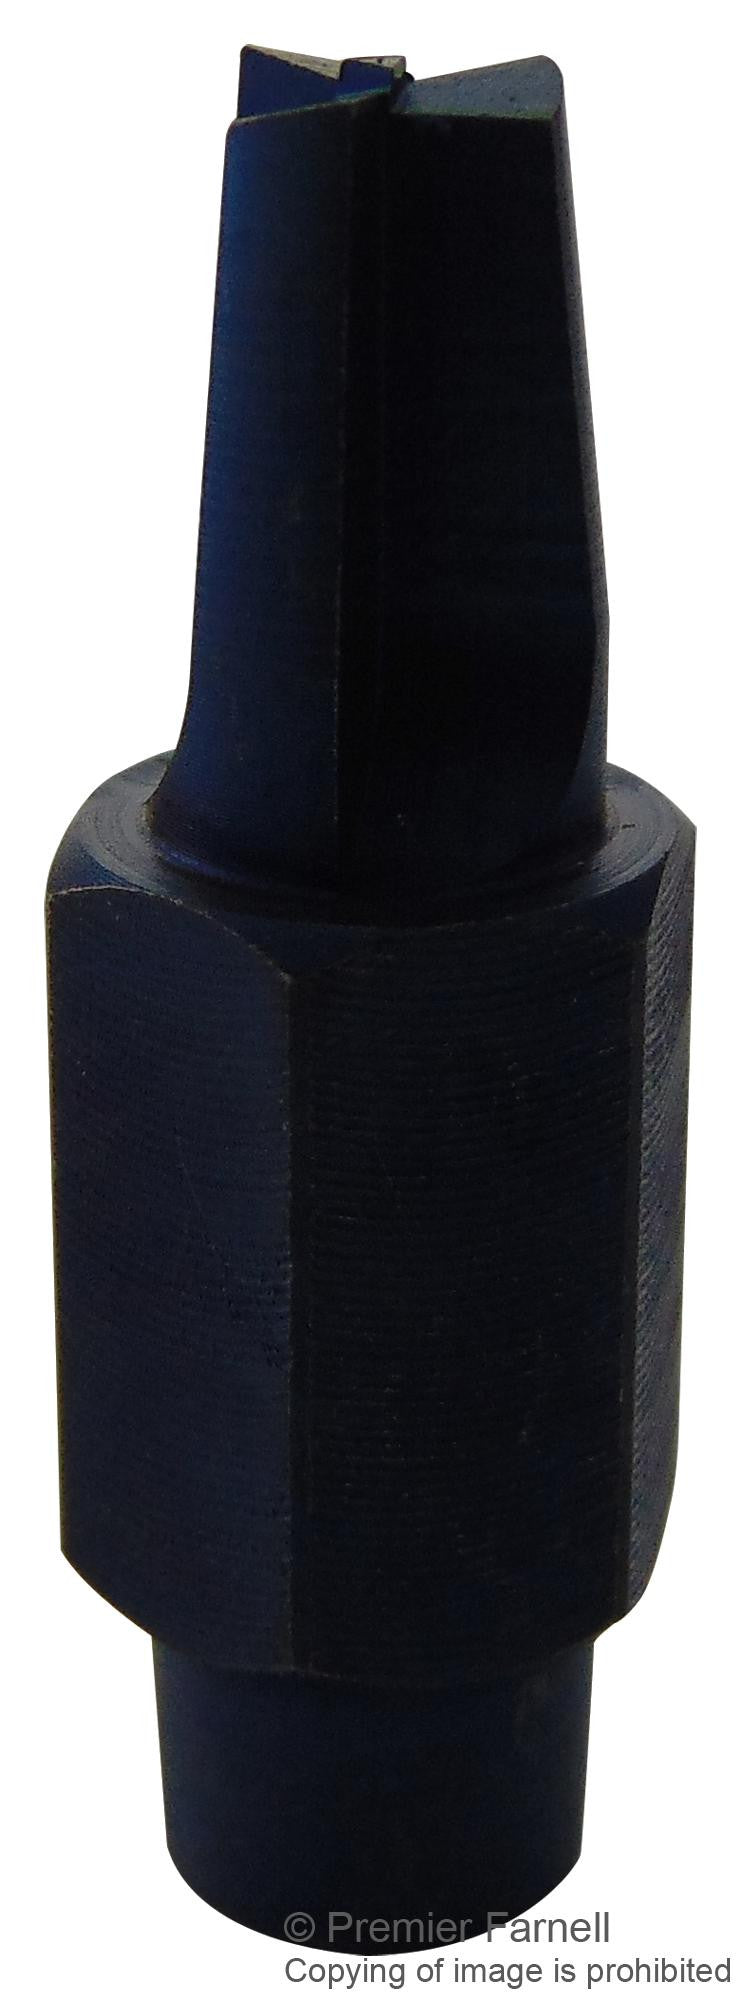 WELLER 0058706794 Cleaning Tool for DSX80 & DXV80 Desoldering Tools, Threadless Nozzle, Conical